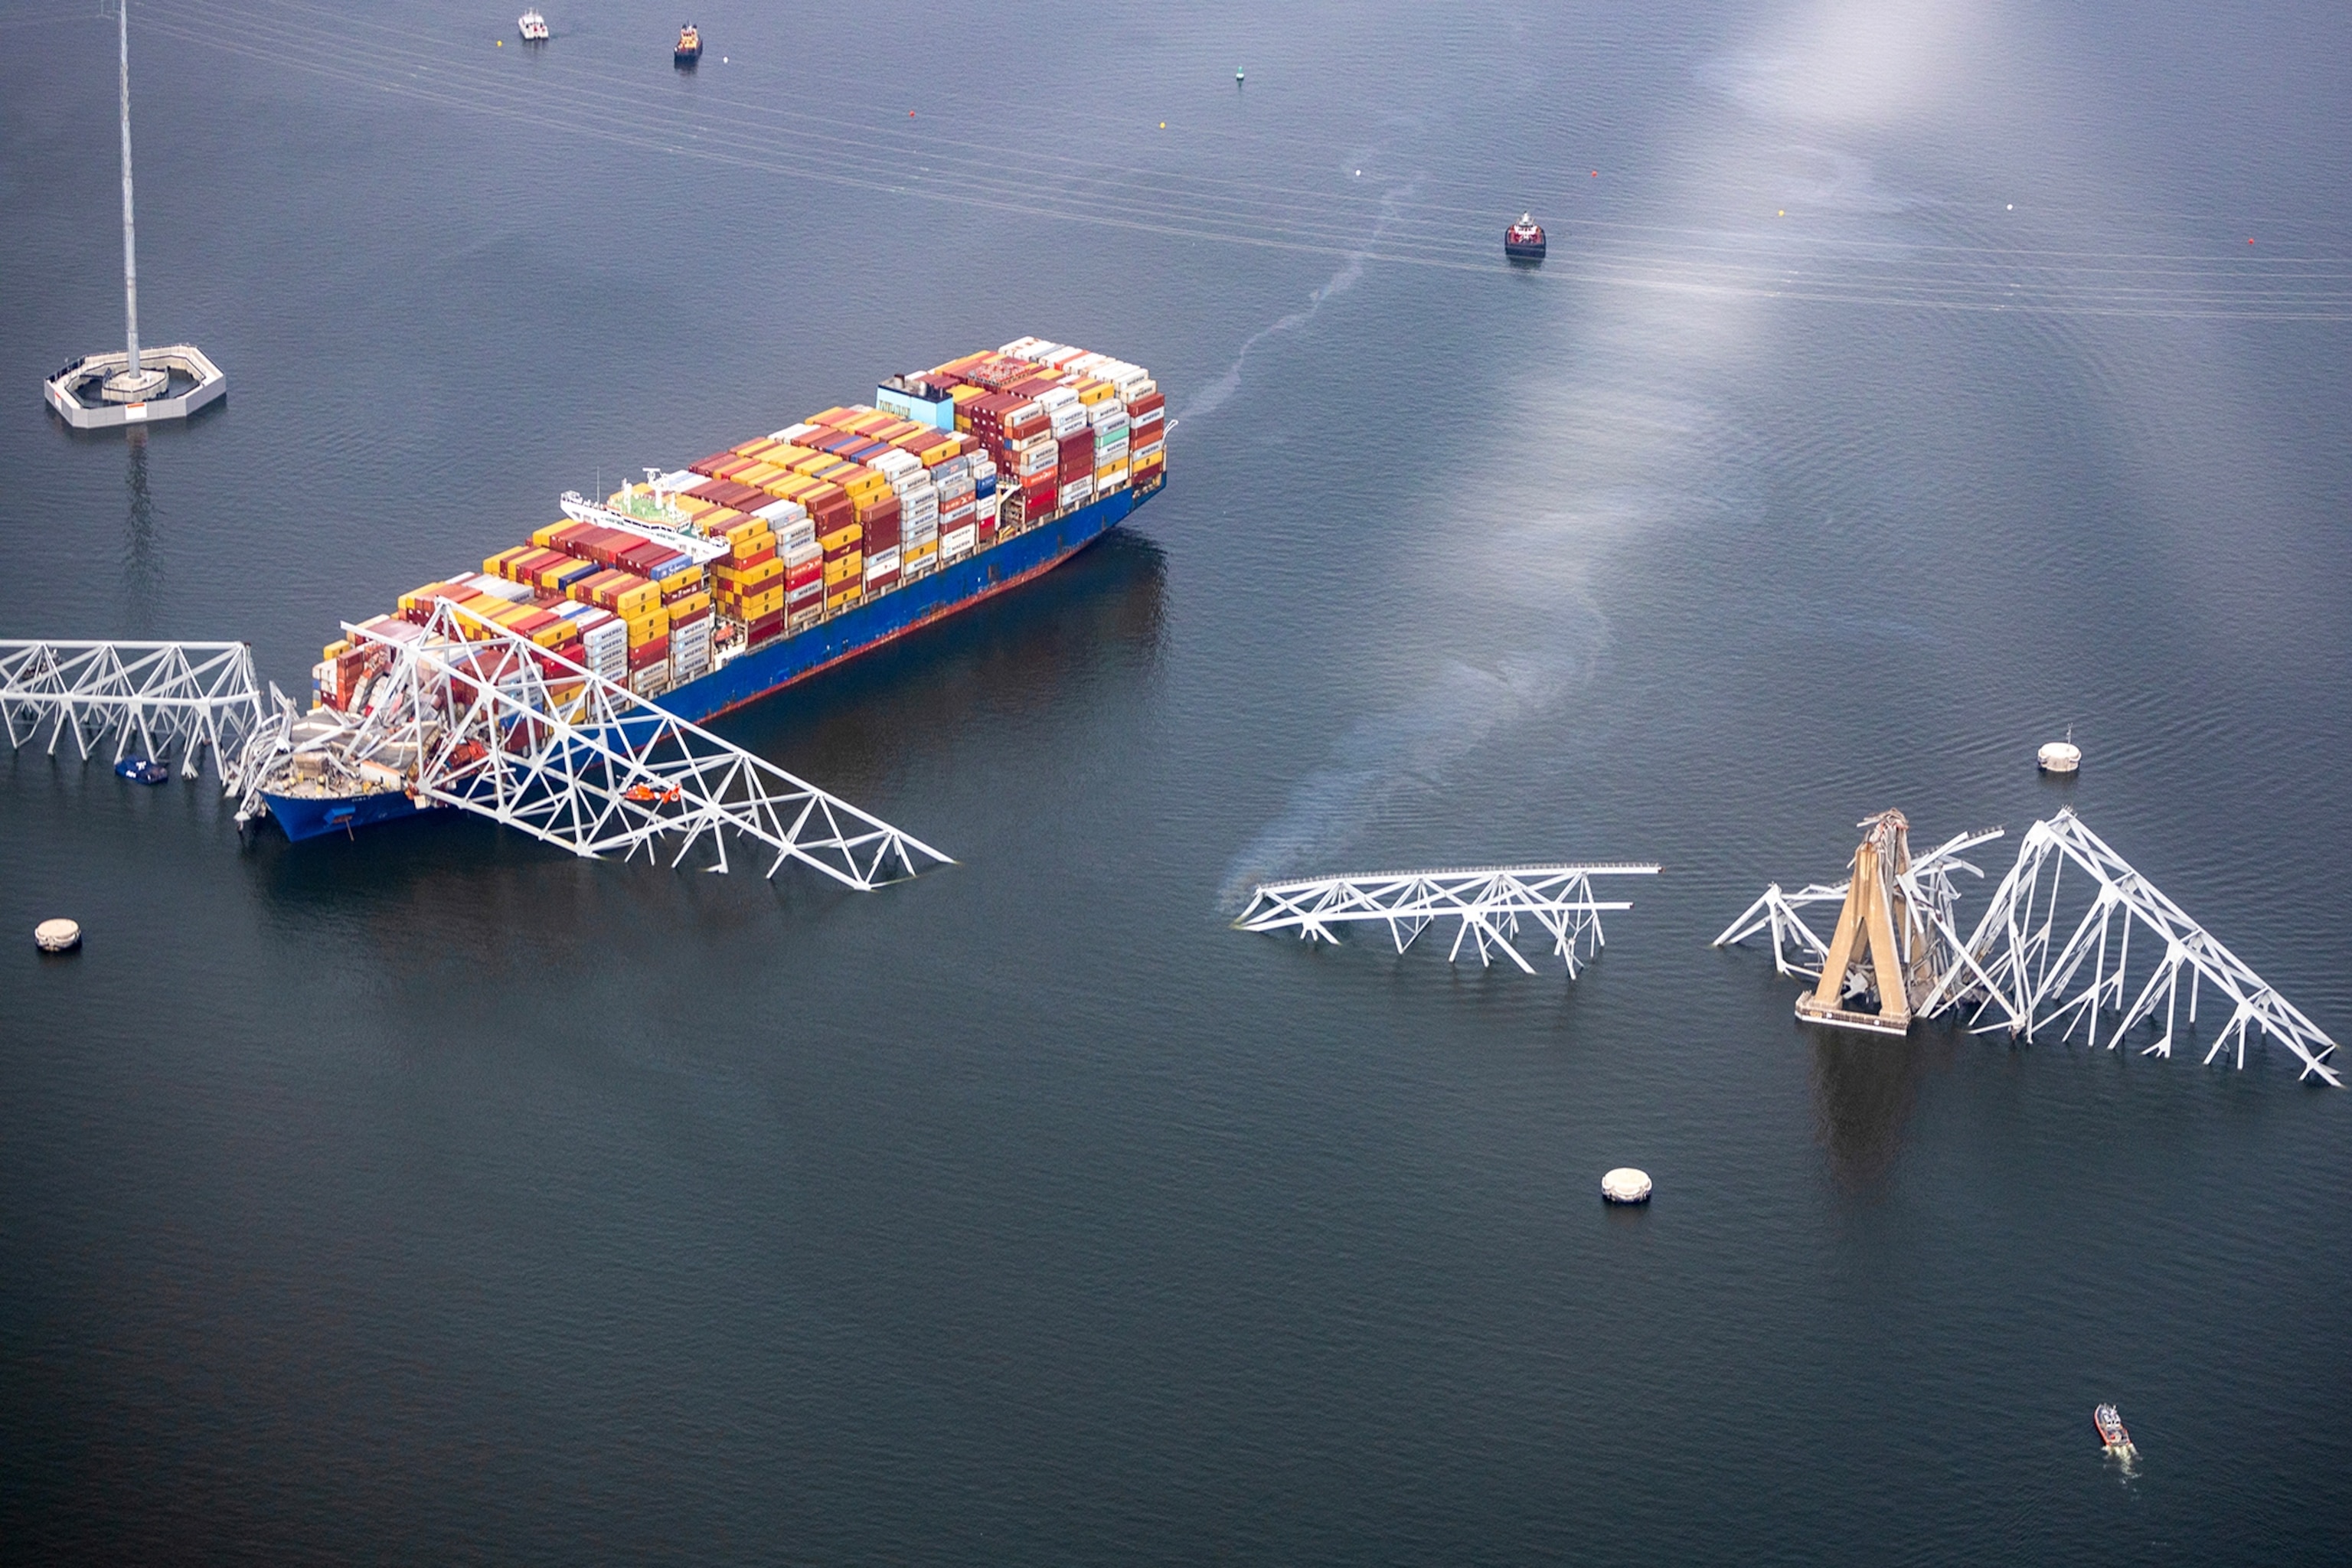 An aerial view show large broken pieces of a bridges structure poking out of the water with a contianer ship of colorful cargo.